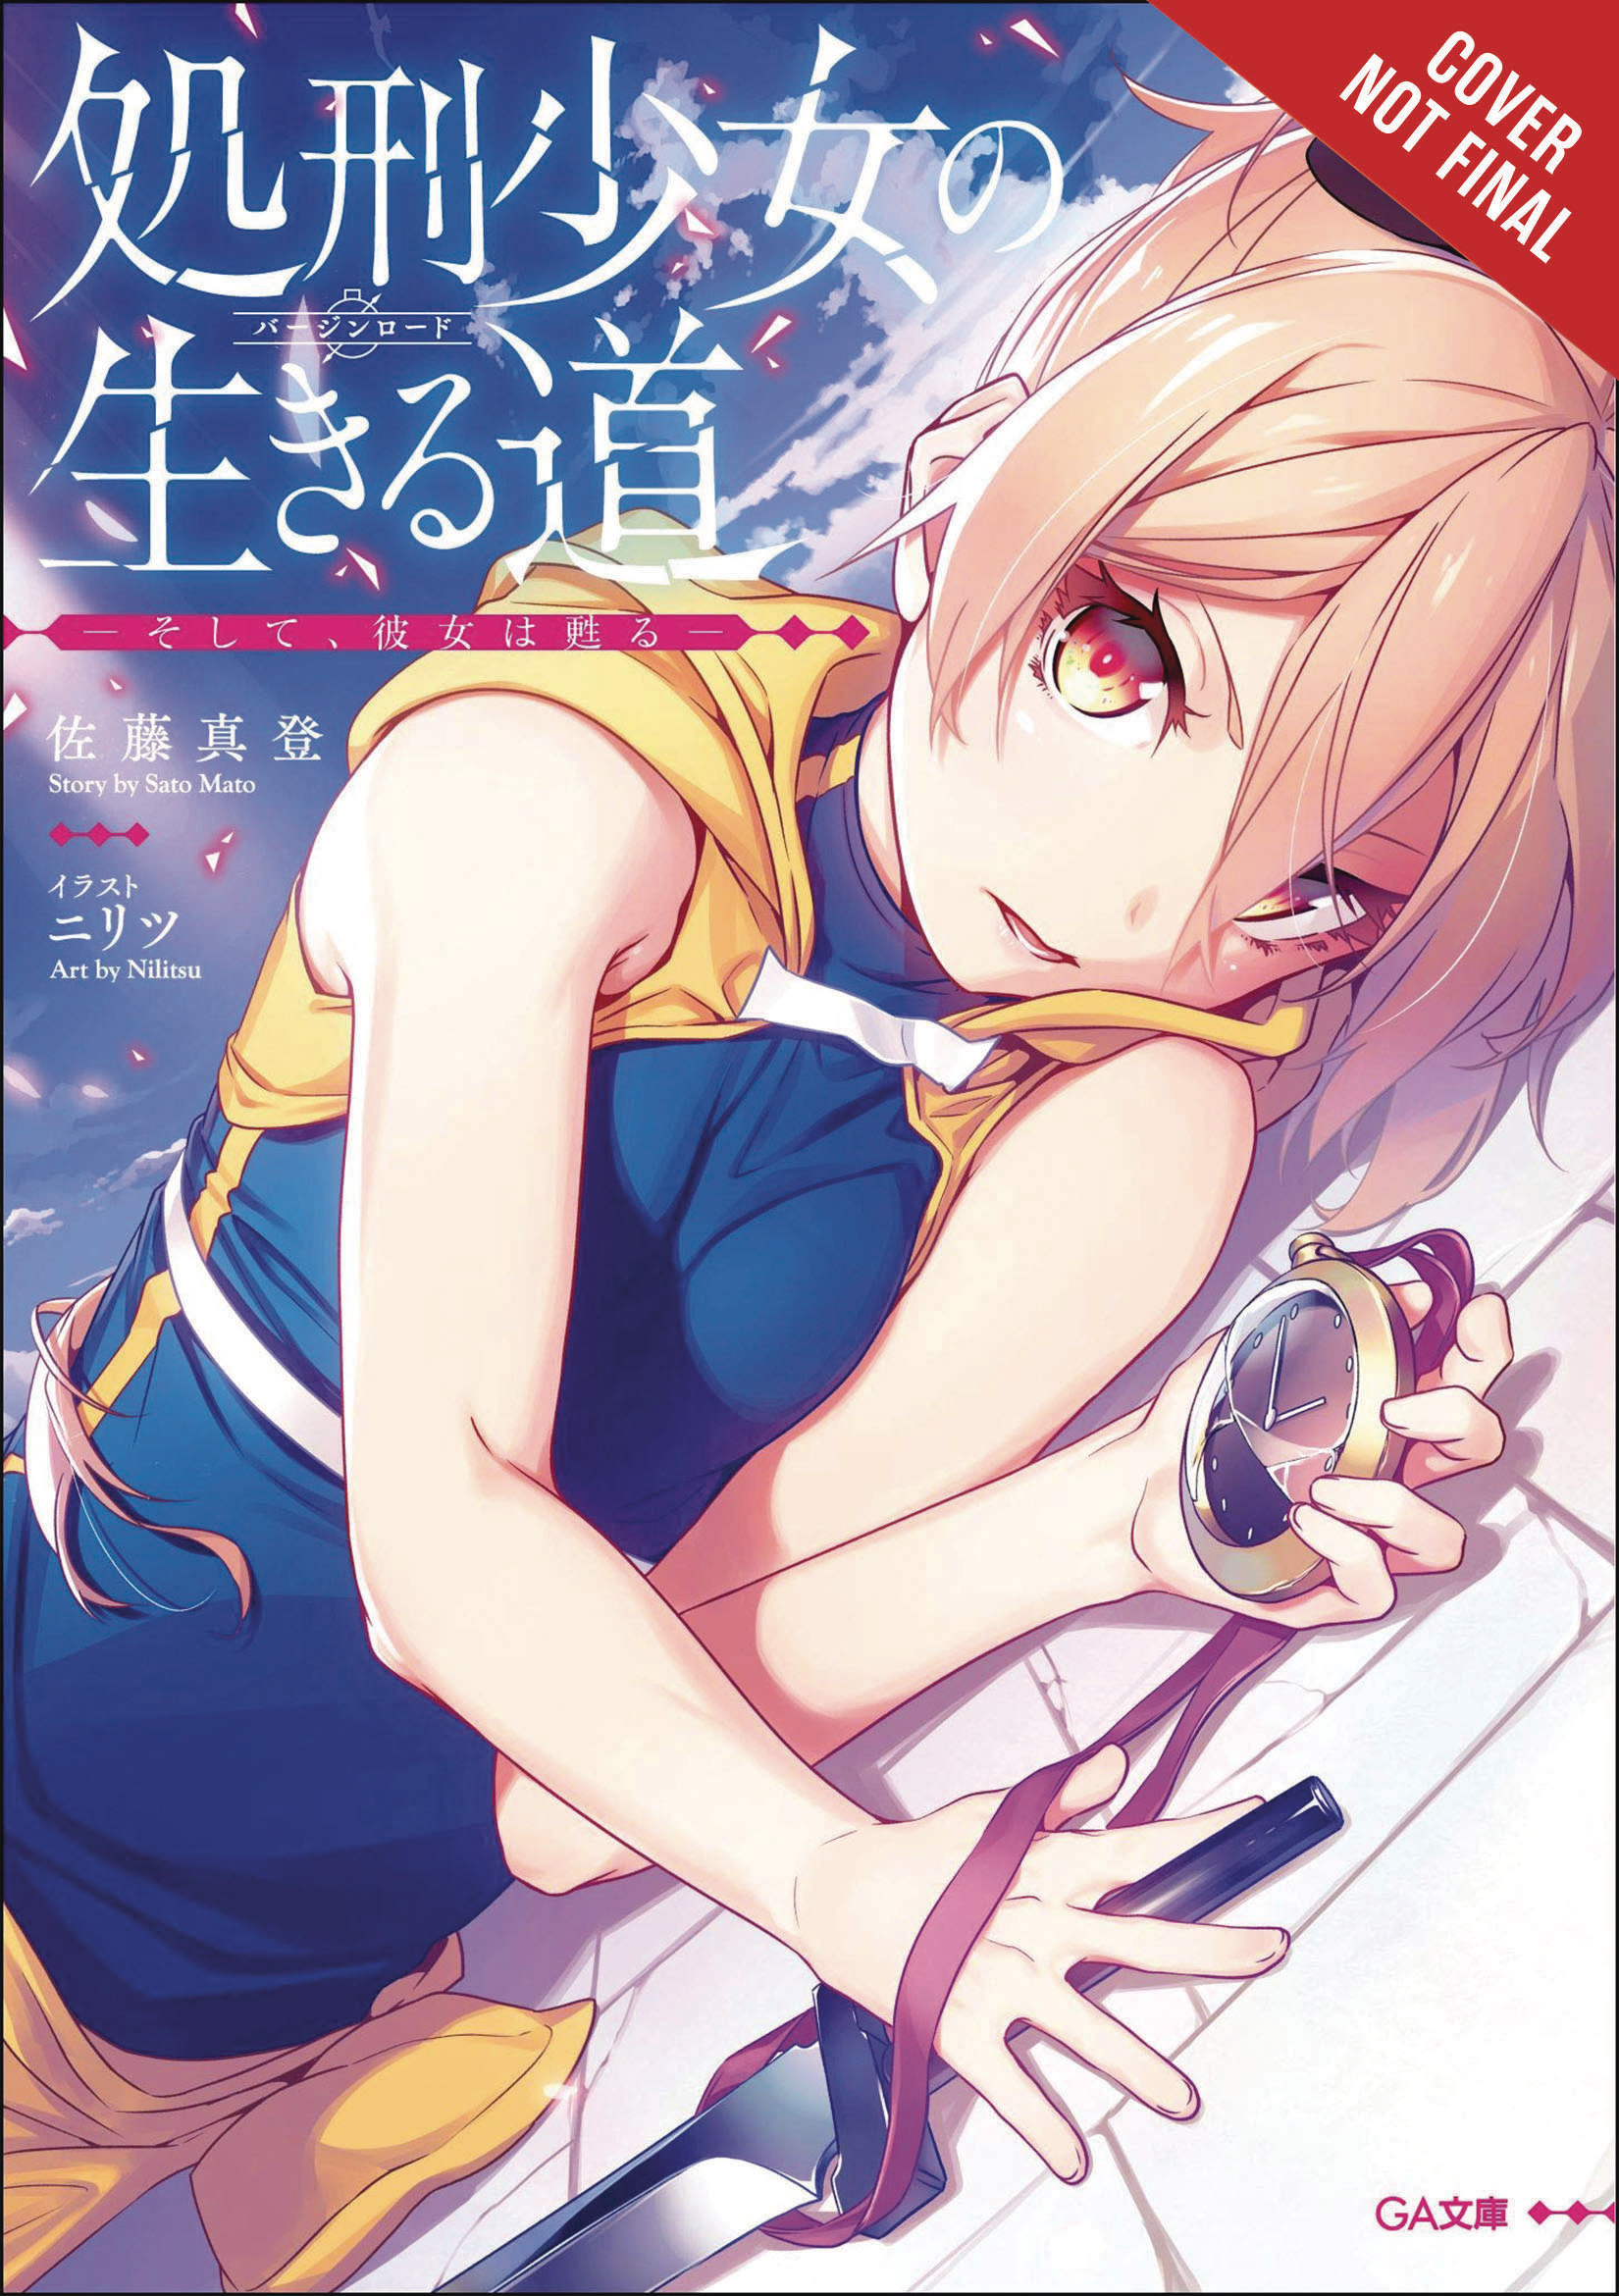 The Executioner and Her Way of Life Light Novel Volume 1